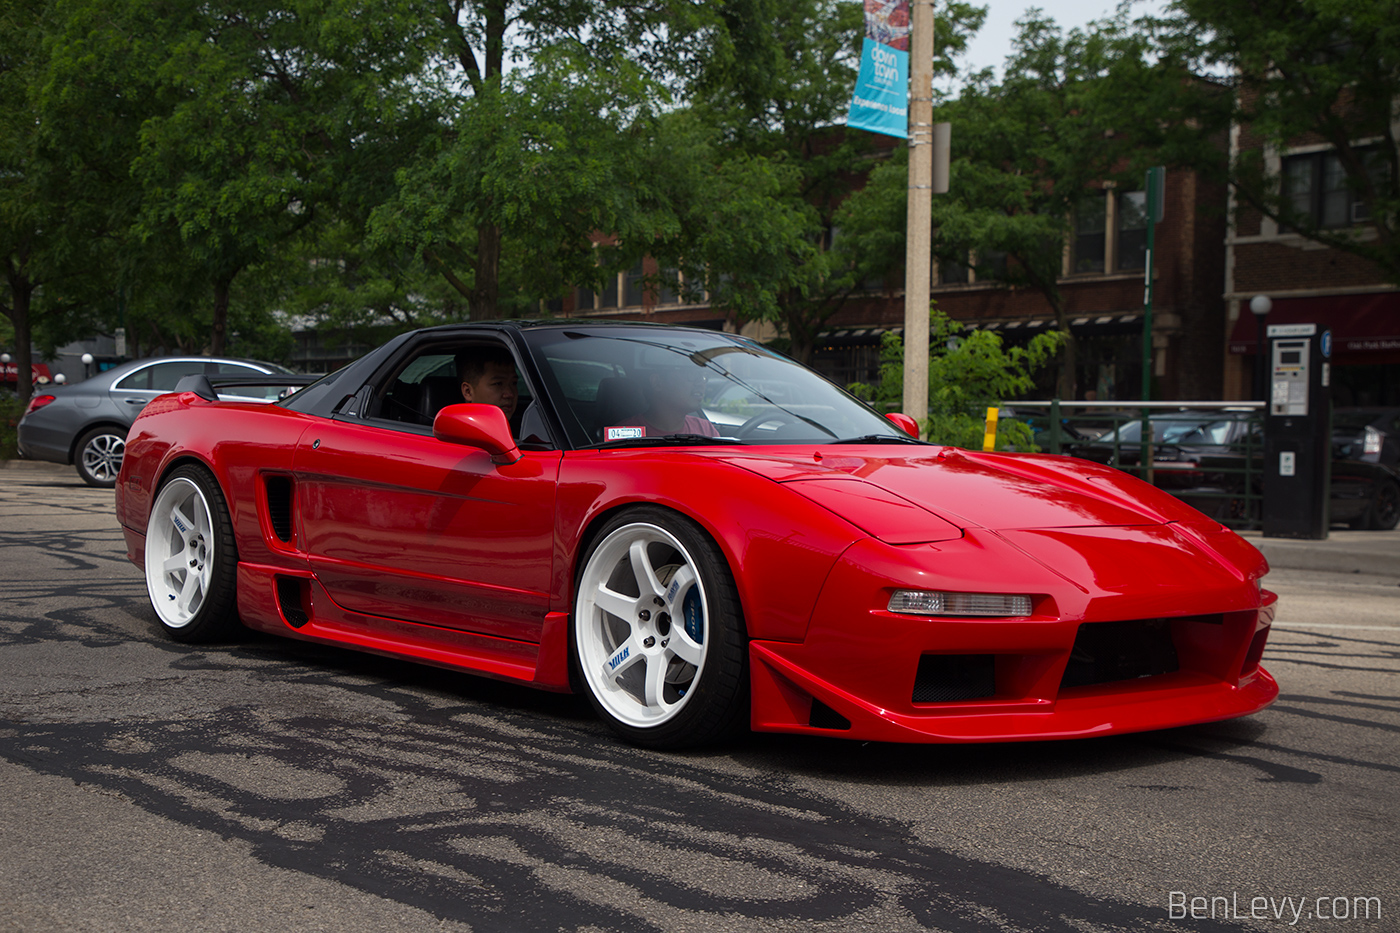 Red Acura NSX at Cars & Coffee Oak Park